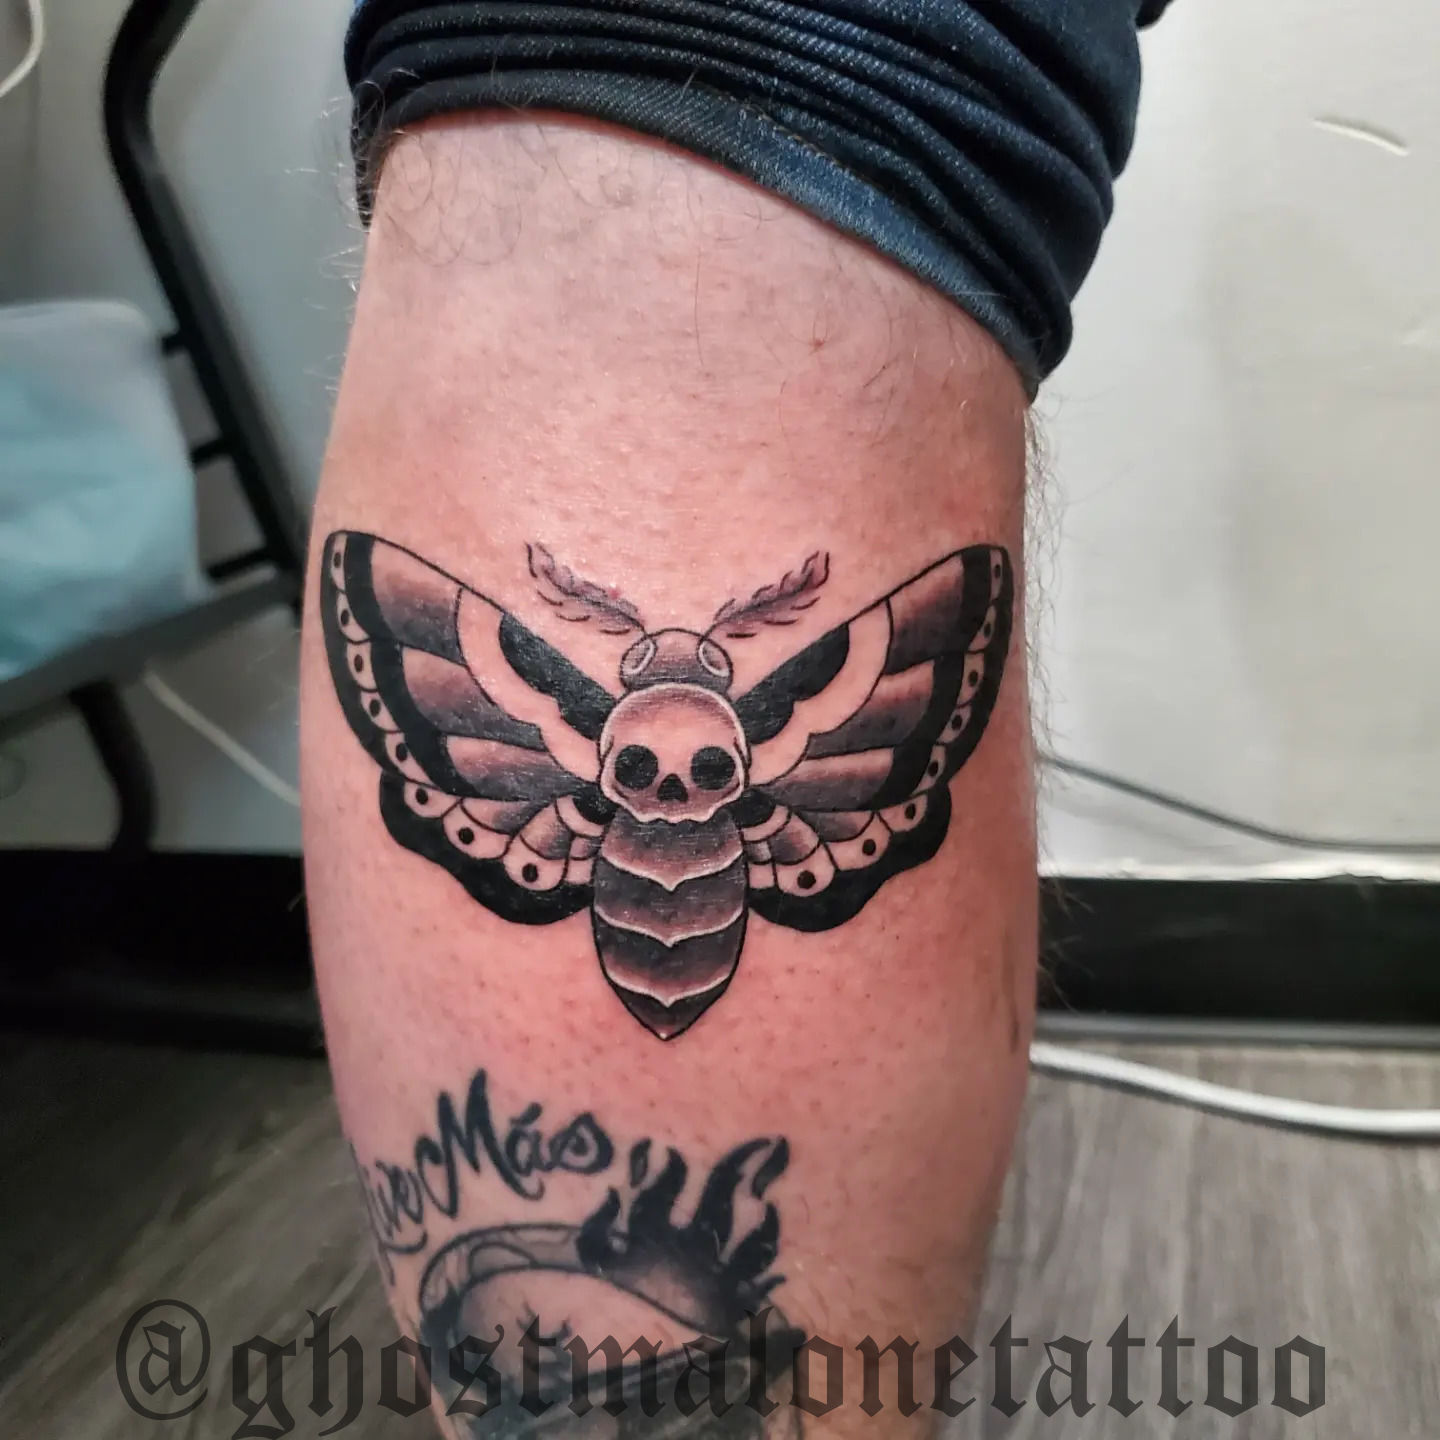 Moth Tattoo Ideas And Meanings These 65 Tattoos Will Blow Your Mind